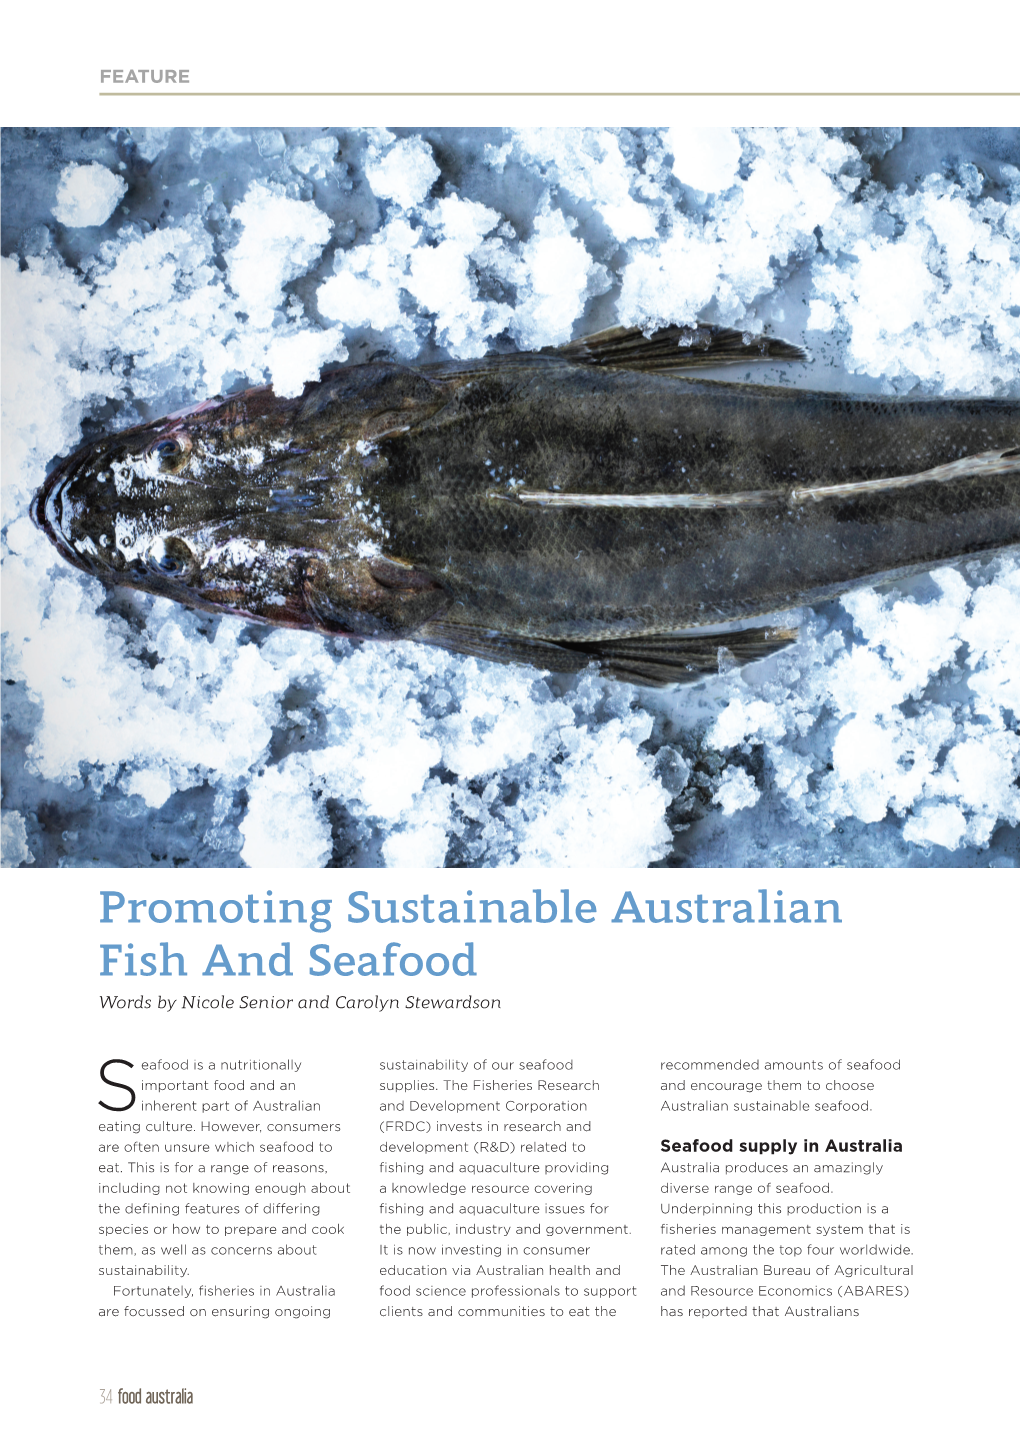 Promoting Sustainable Australian Fish and Seafood Words by Nicole Senior and Carolyn Stewardson